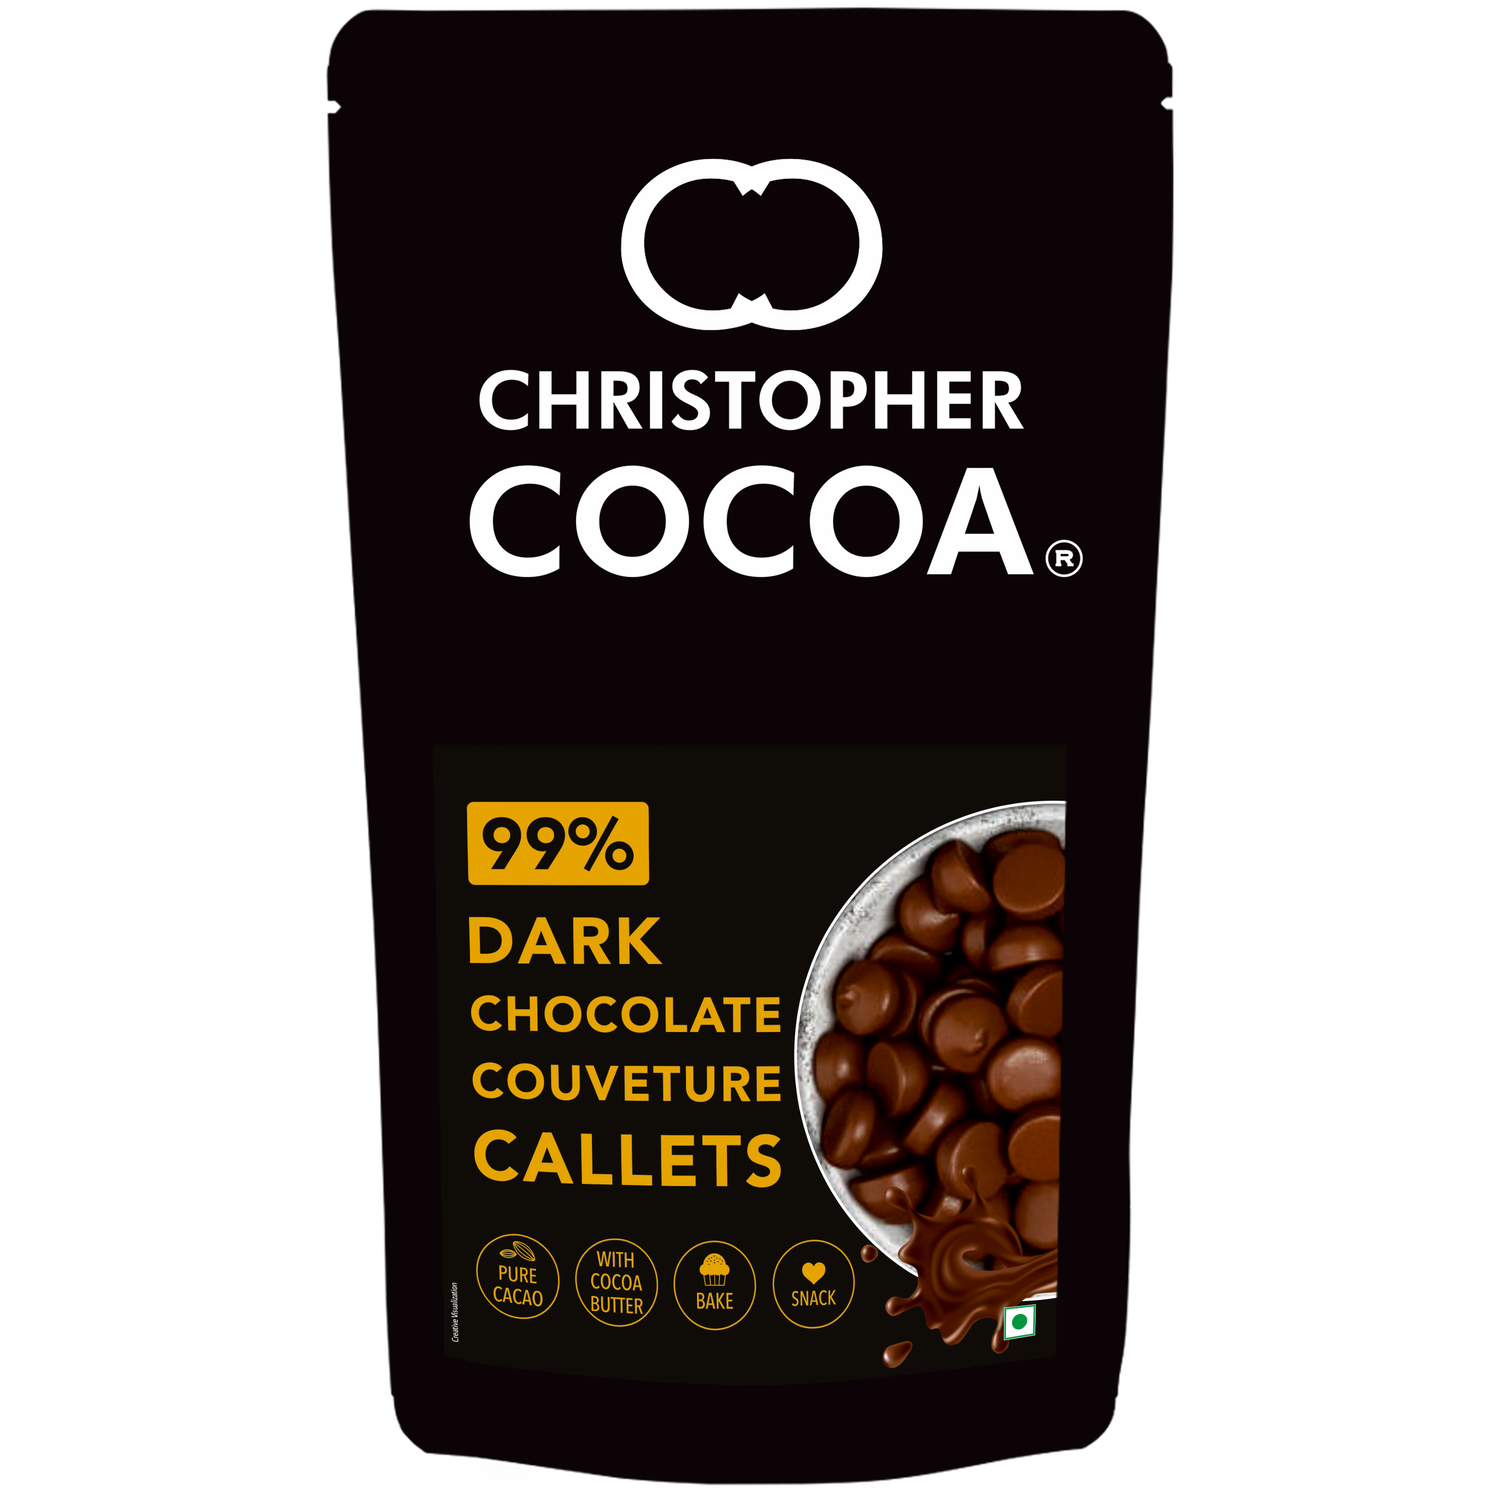 Christopher Cocoa 99% Pure Dark Chocolate Couverture Callets 1Kg (Chocolate Chips, Buttons, Snack, Bake, Cake, Hot Chocolate) 